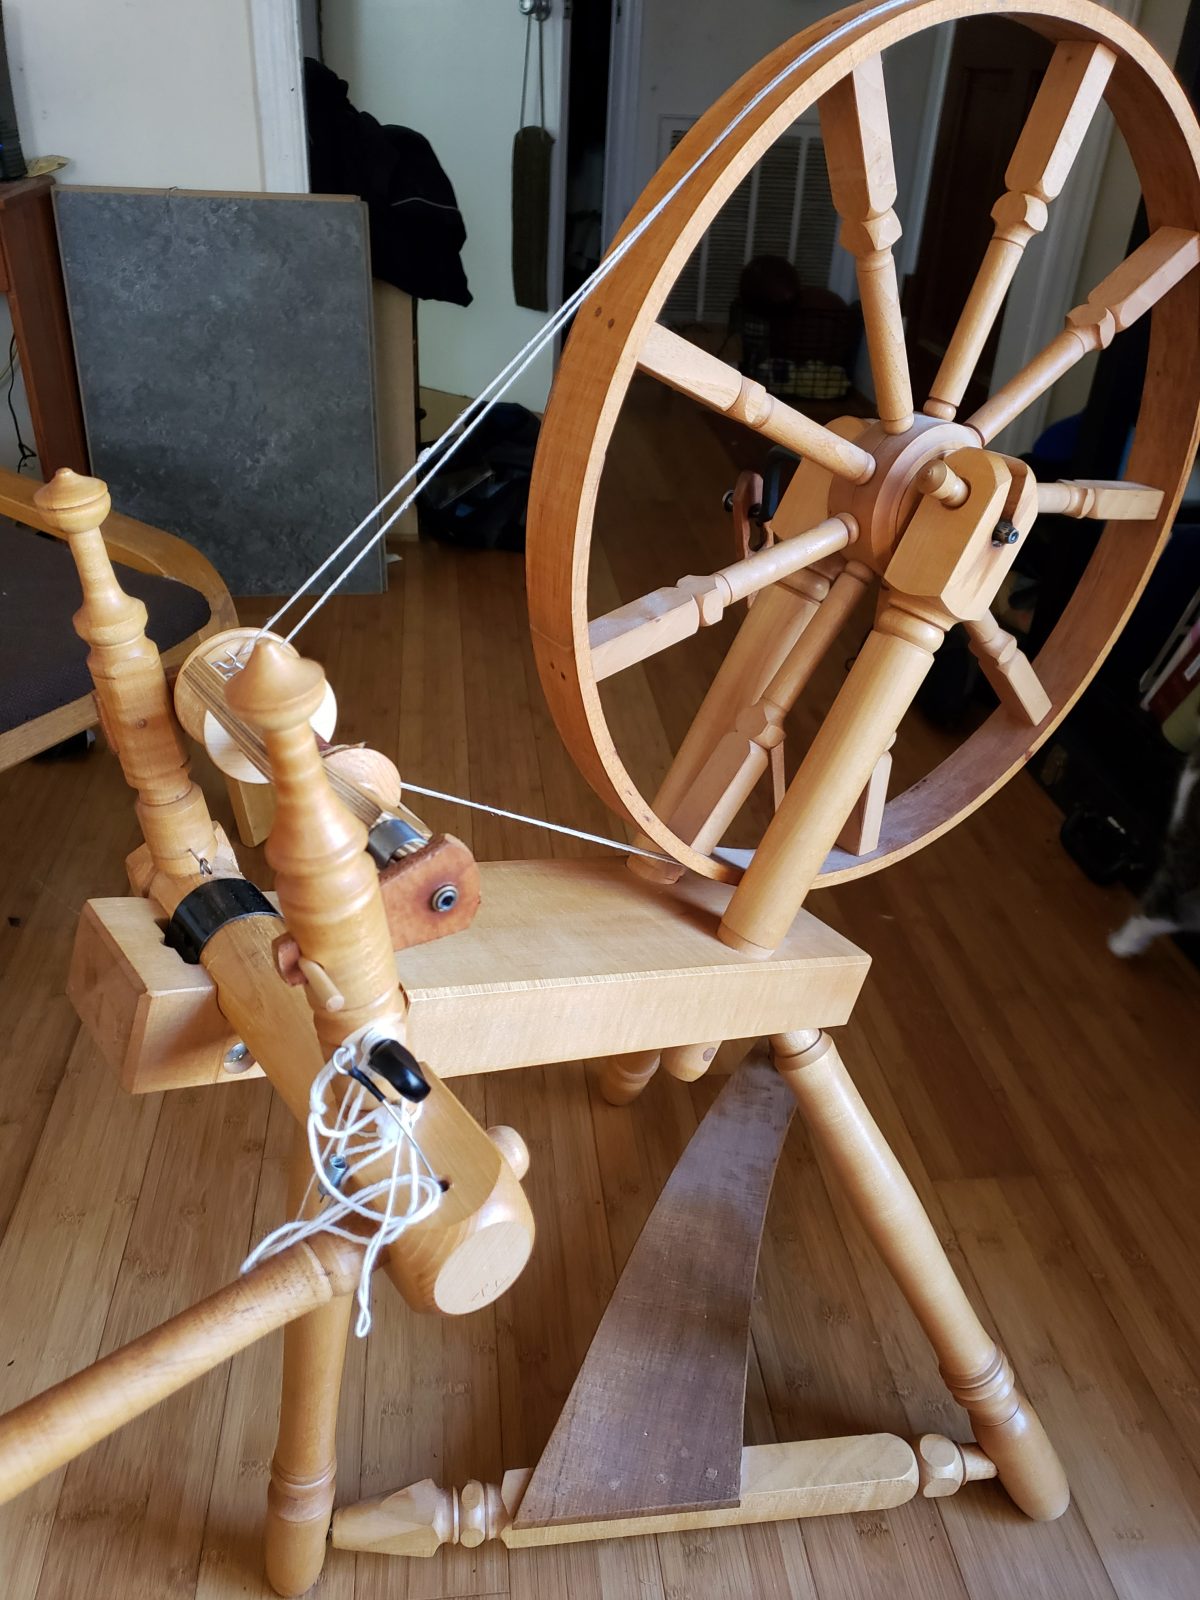 A New-to-Me Spinning Wheel